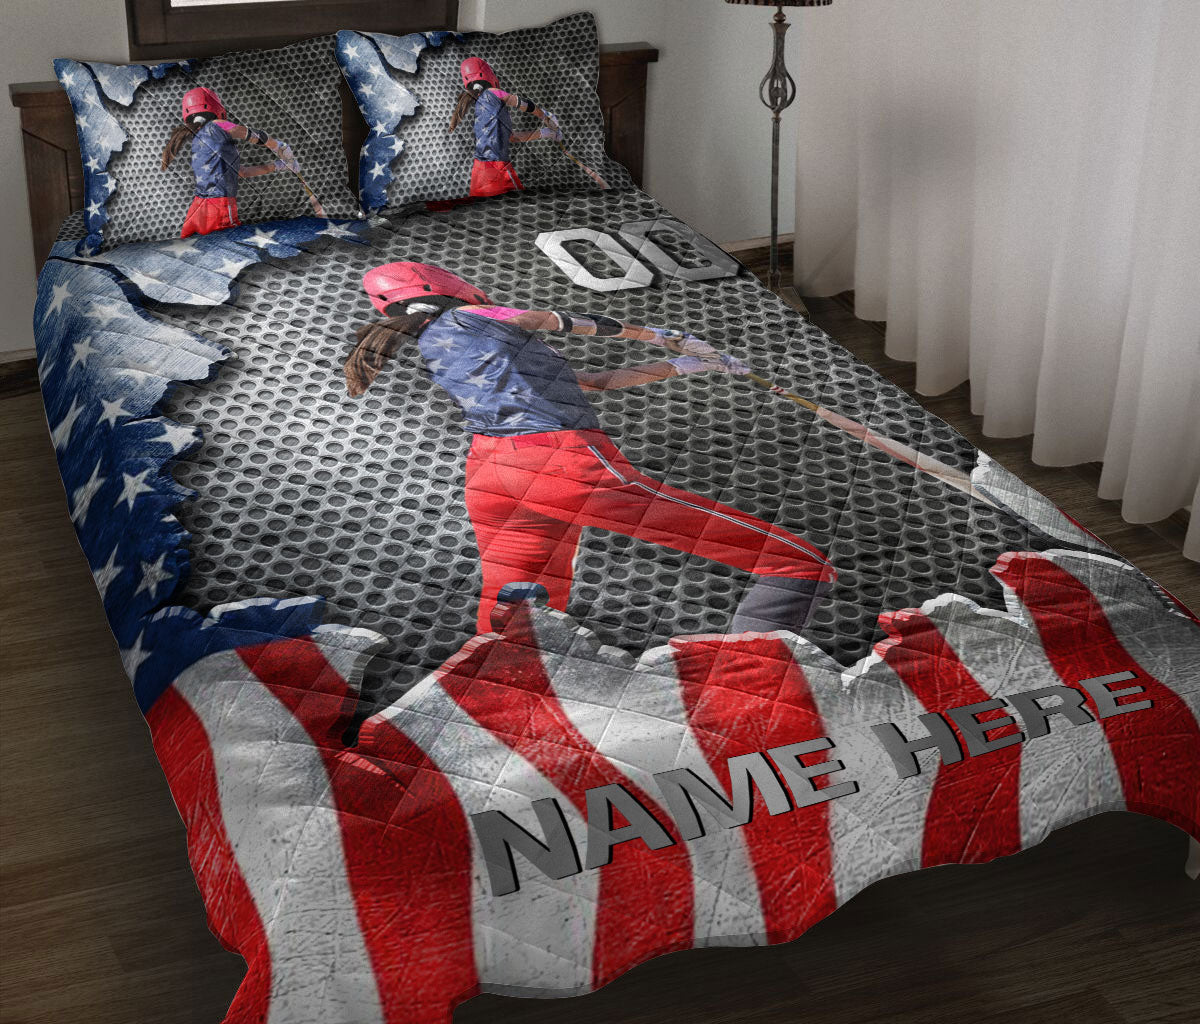 Ohaprints-Quilt-Bed-Set-Pillowcase-Softball-Batter-Sport-Us-American-Flag-Custom-Personalized-Name-Number-Blanket-Bedspread-Bedding-3100-Throw (55'' x 60'')